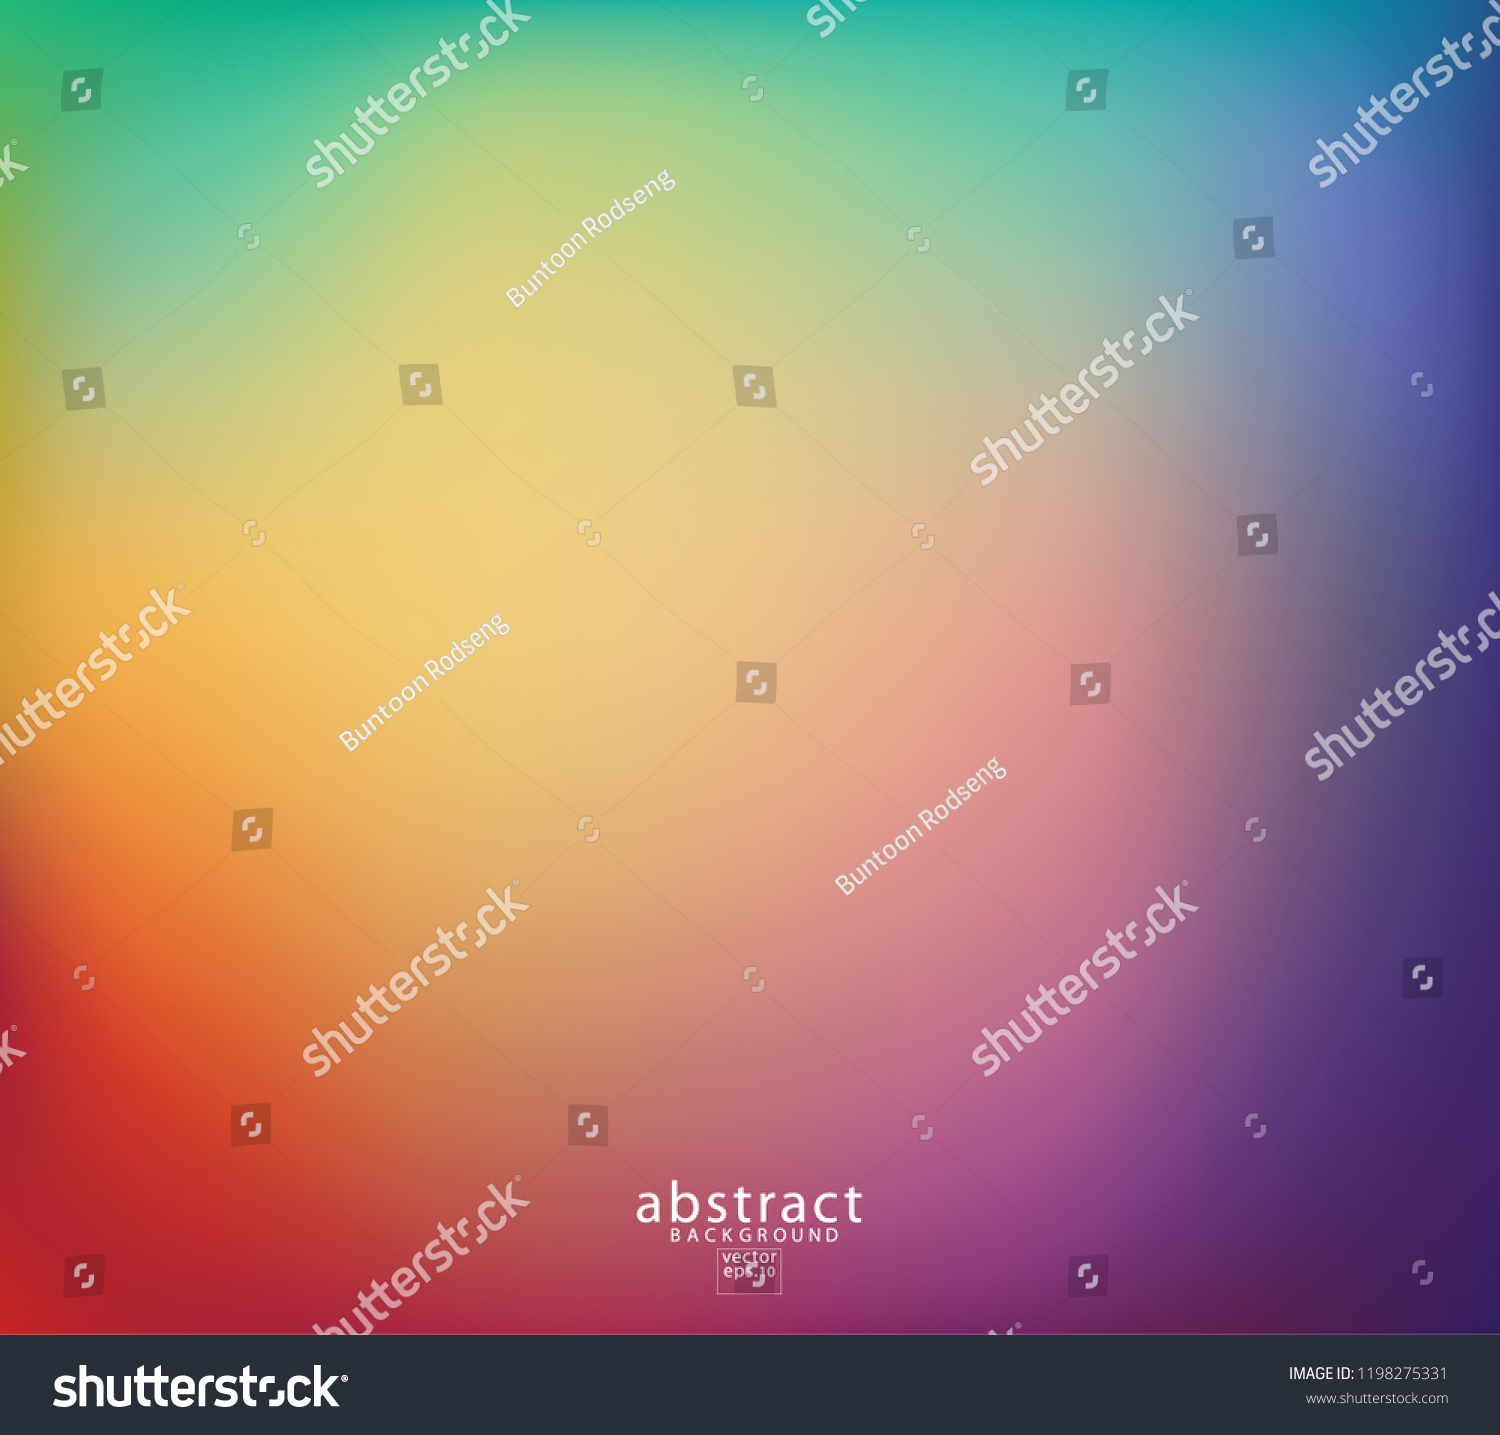 Abstract blurred gradient mesh background bright rainbow colors. Colorful smooth soft banner template. Creative vibrant vector illustration #1198275331